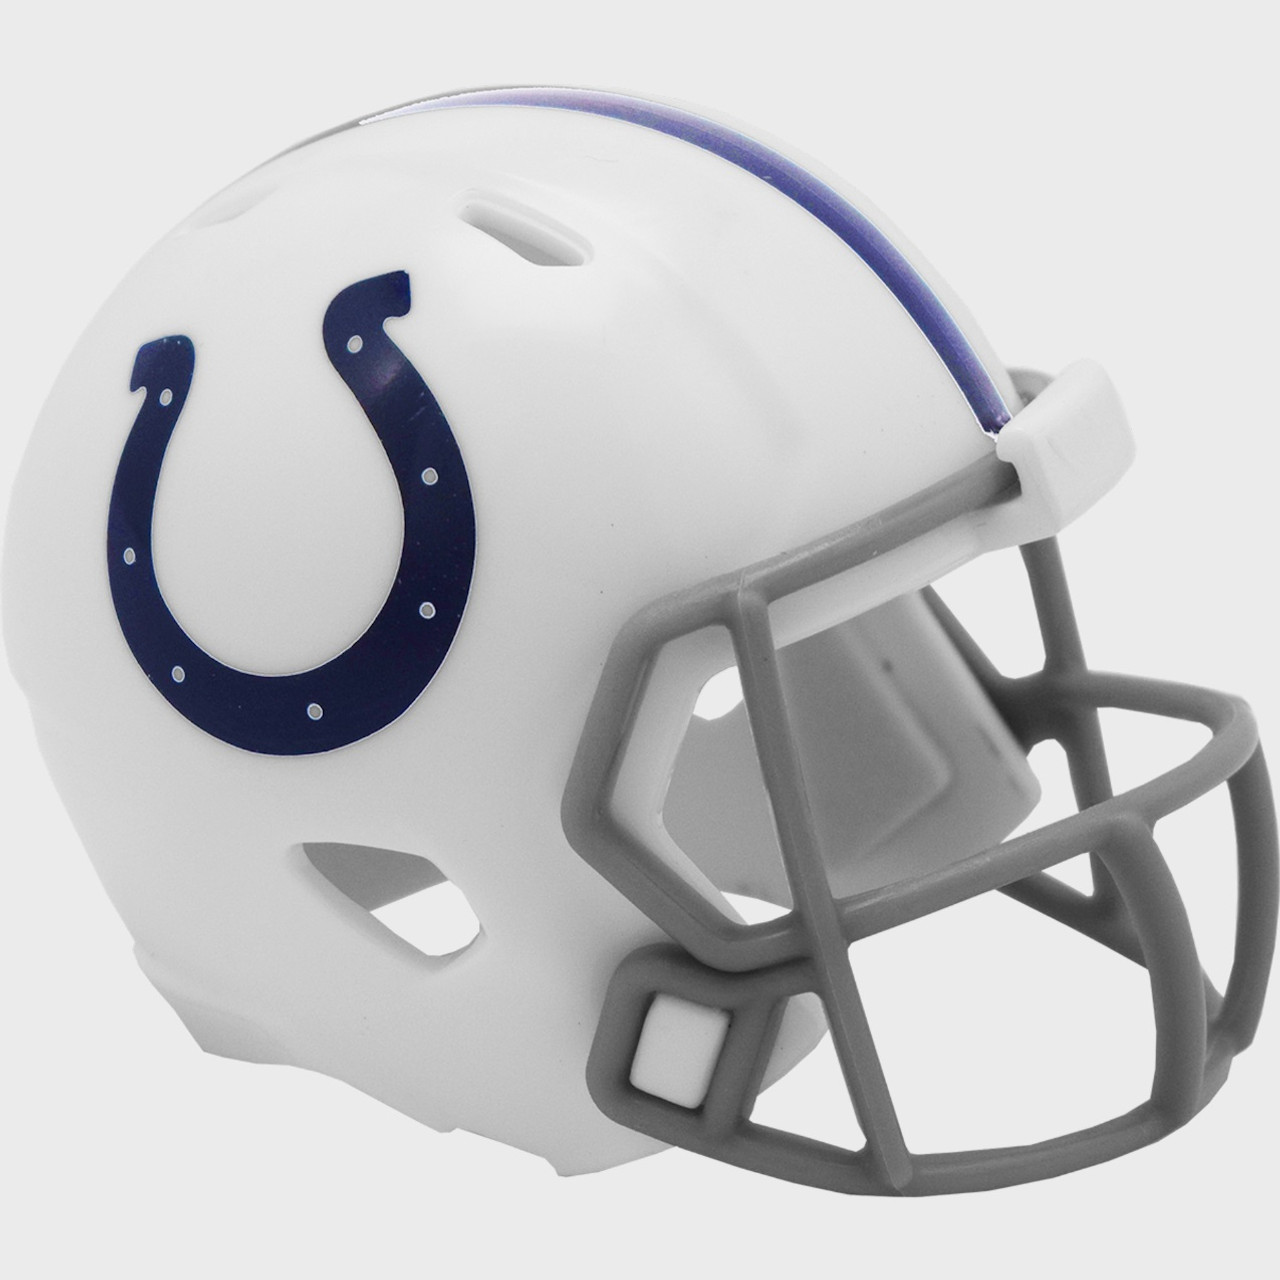 NFL Indianapolis Colts Riddell White Speed Mini Football